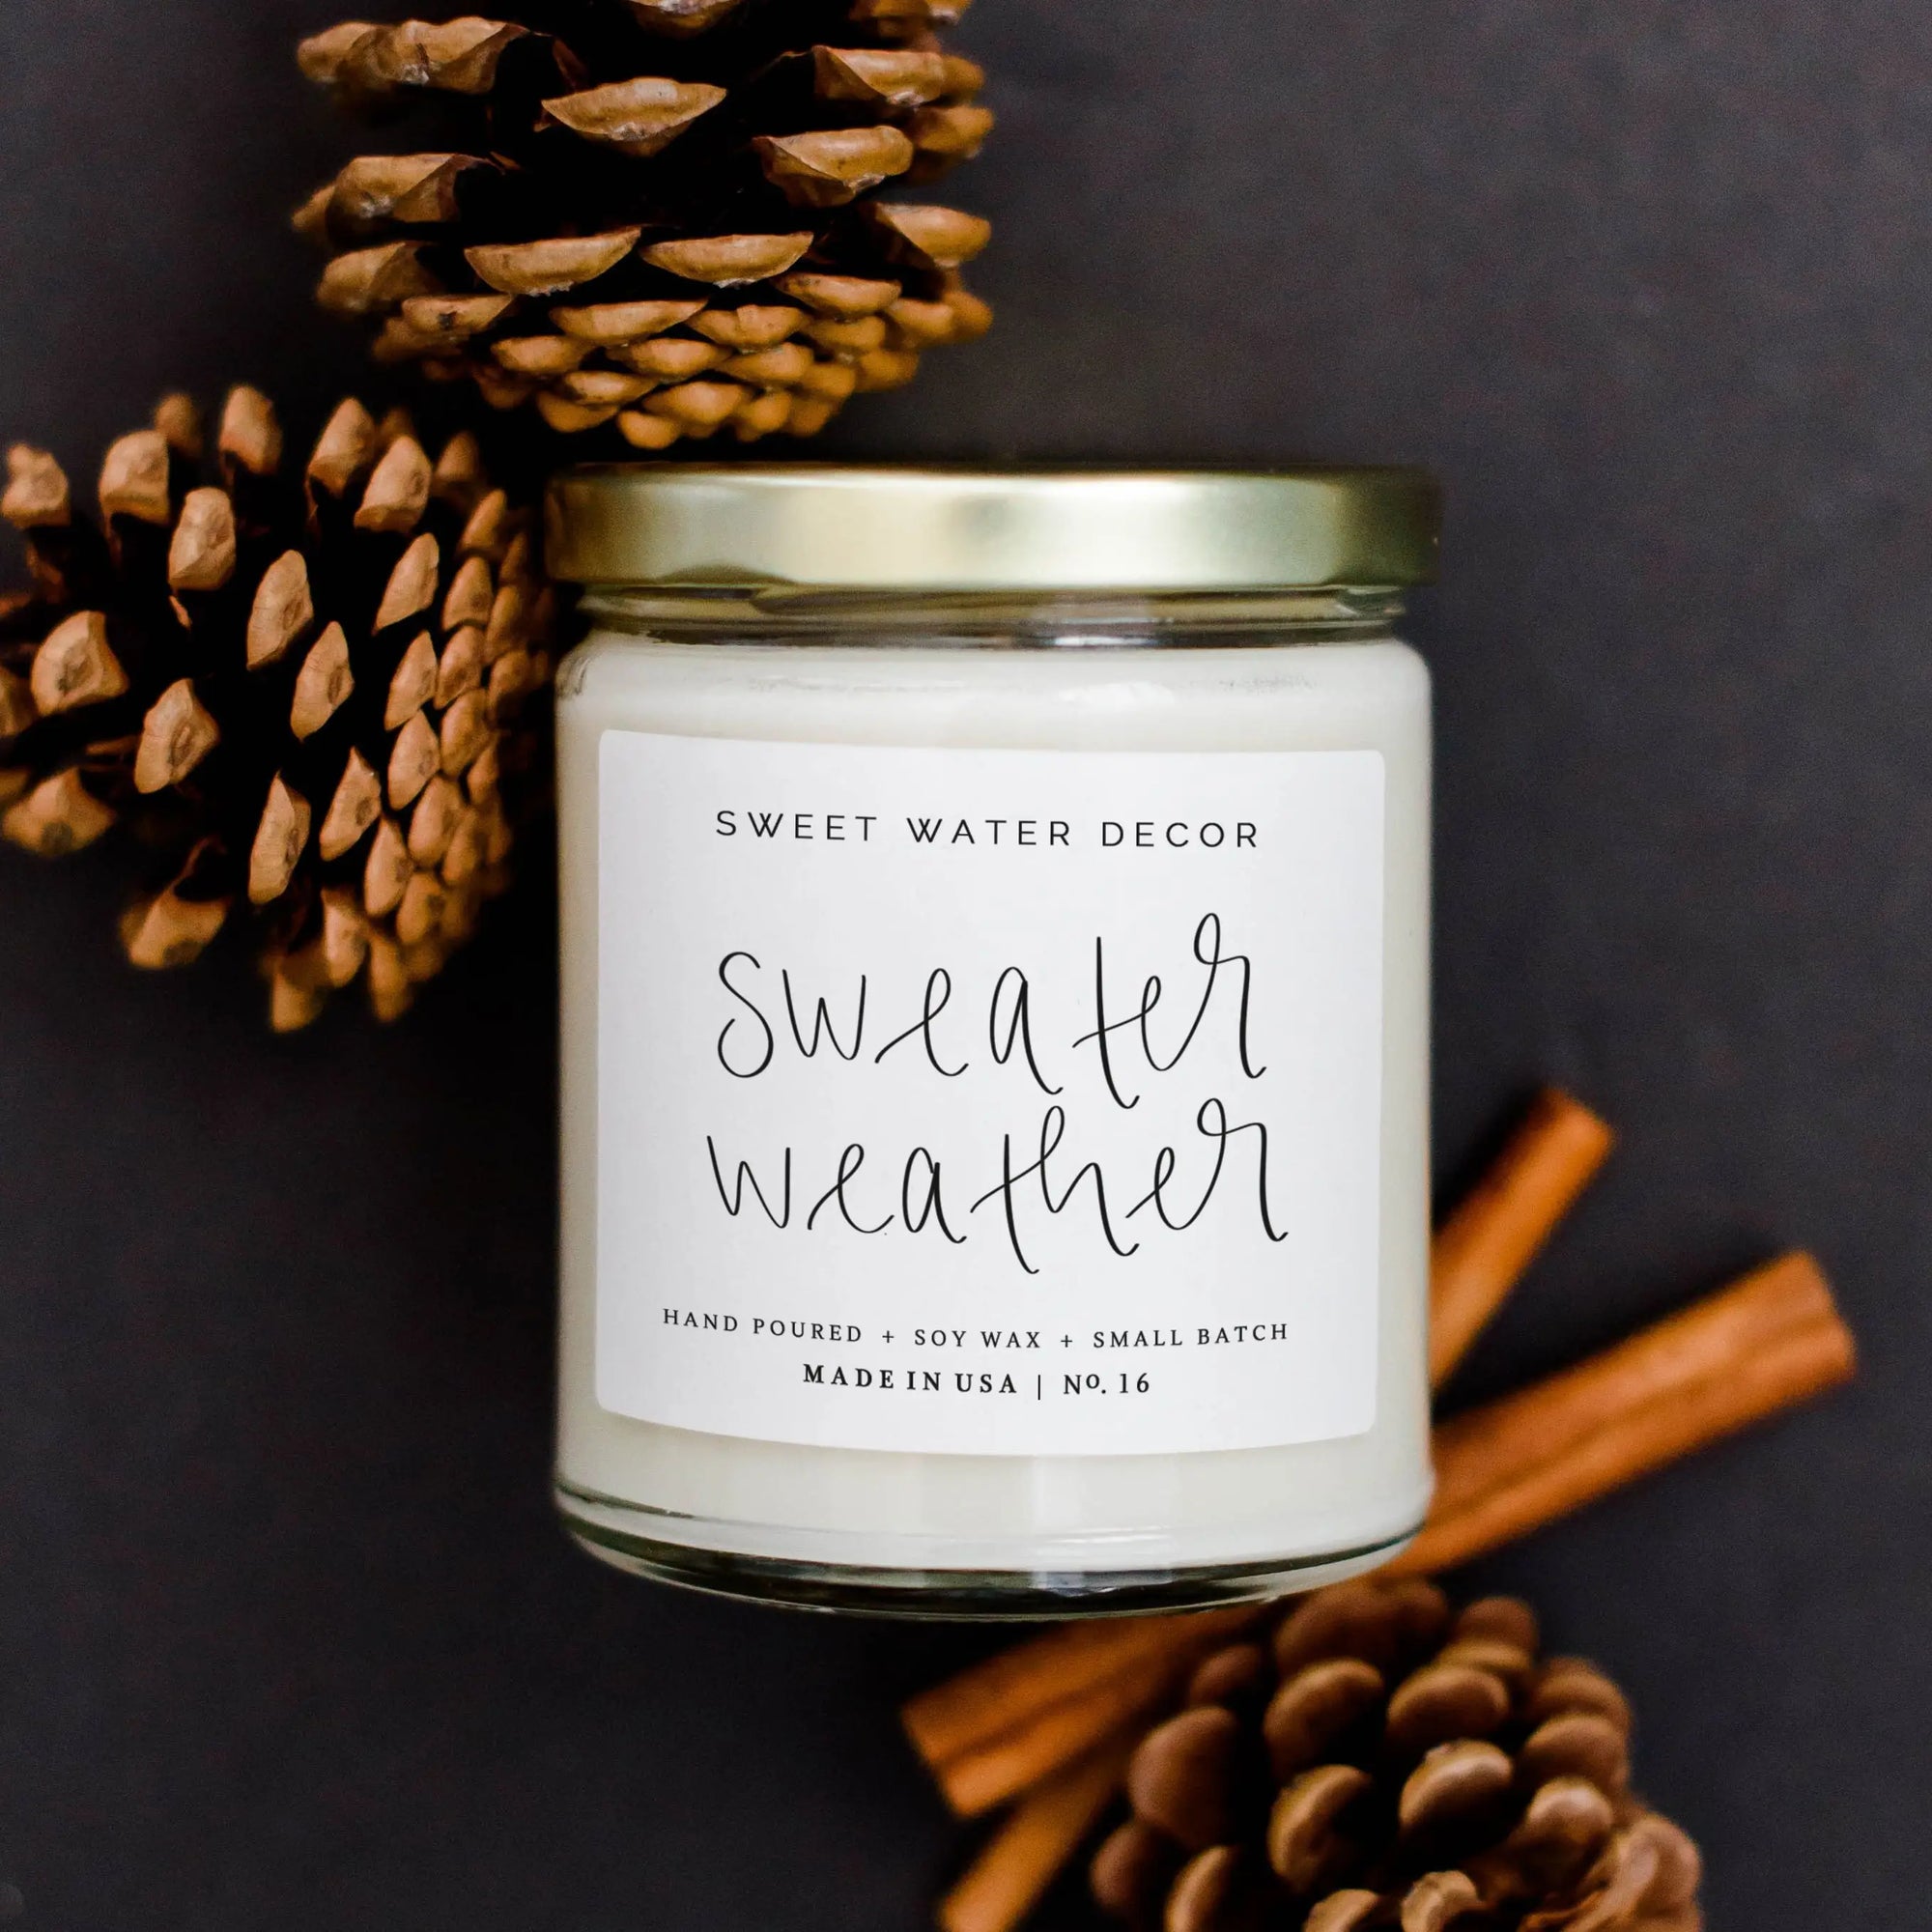 The Sweater Weather Soy Candle in Clear Jar by Sweet Water Decor